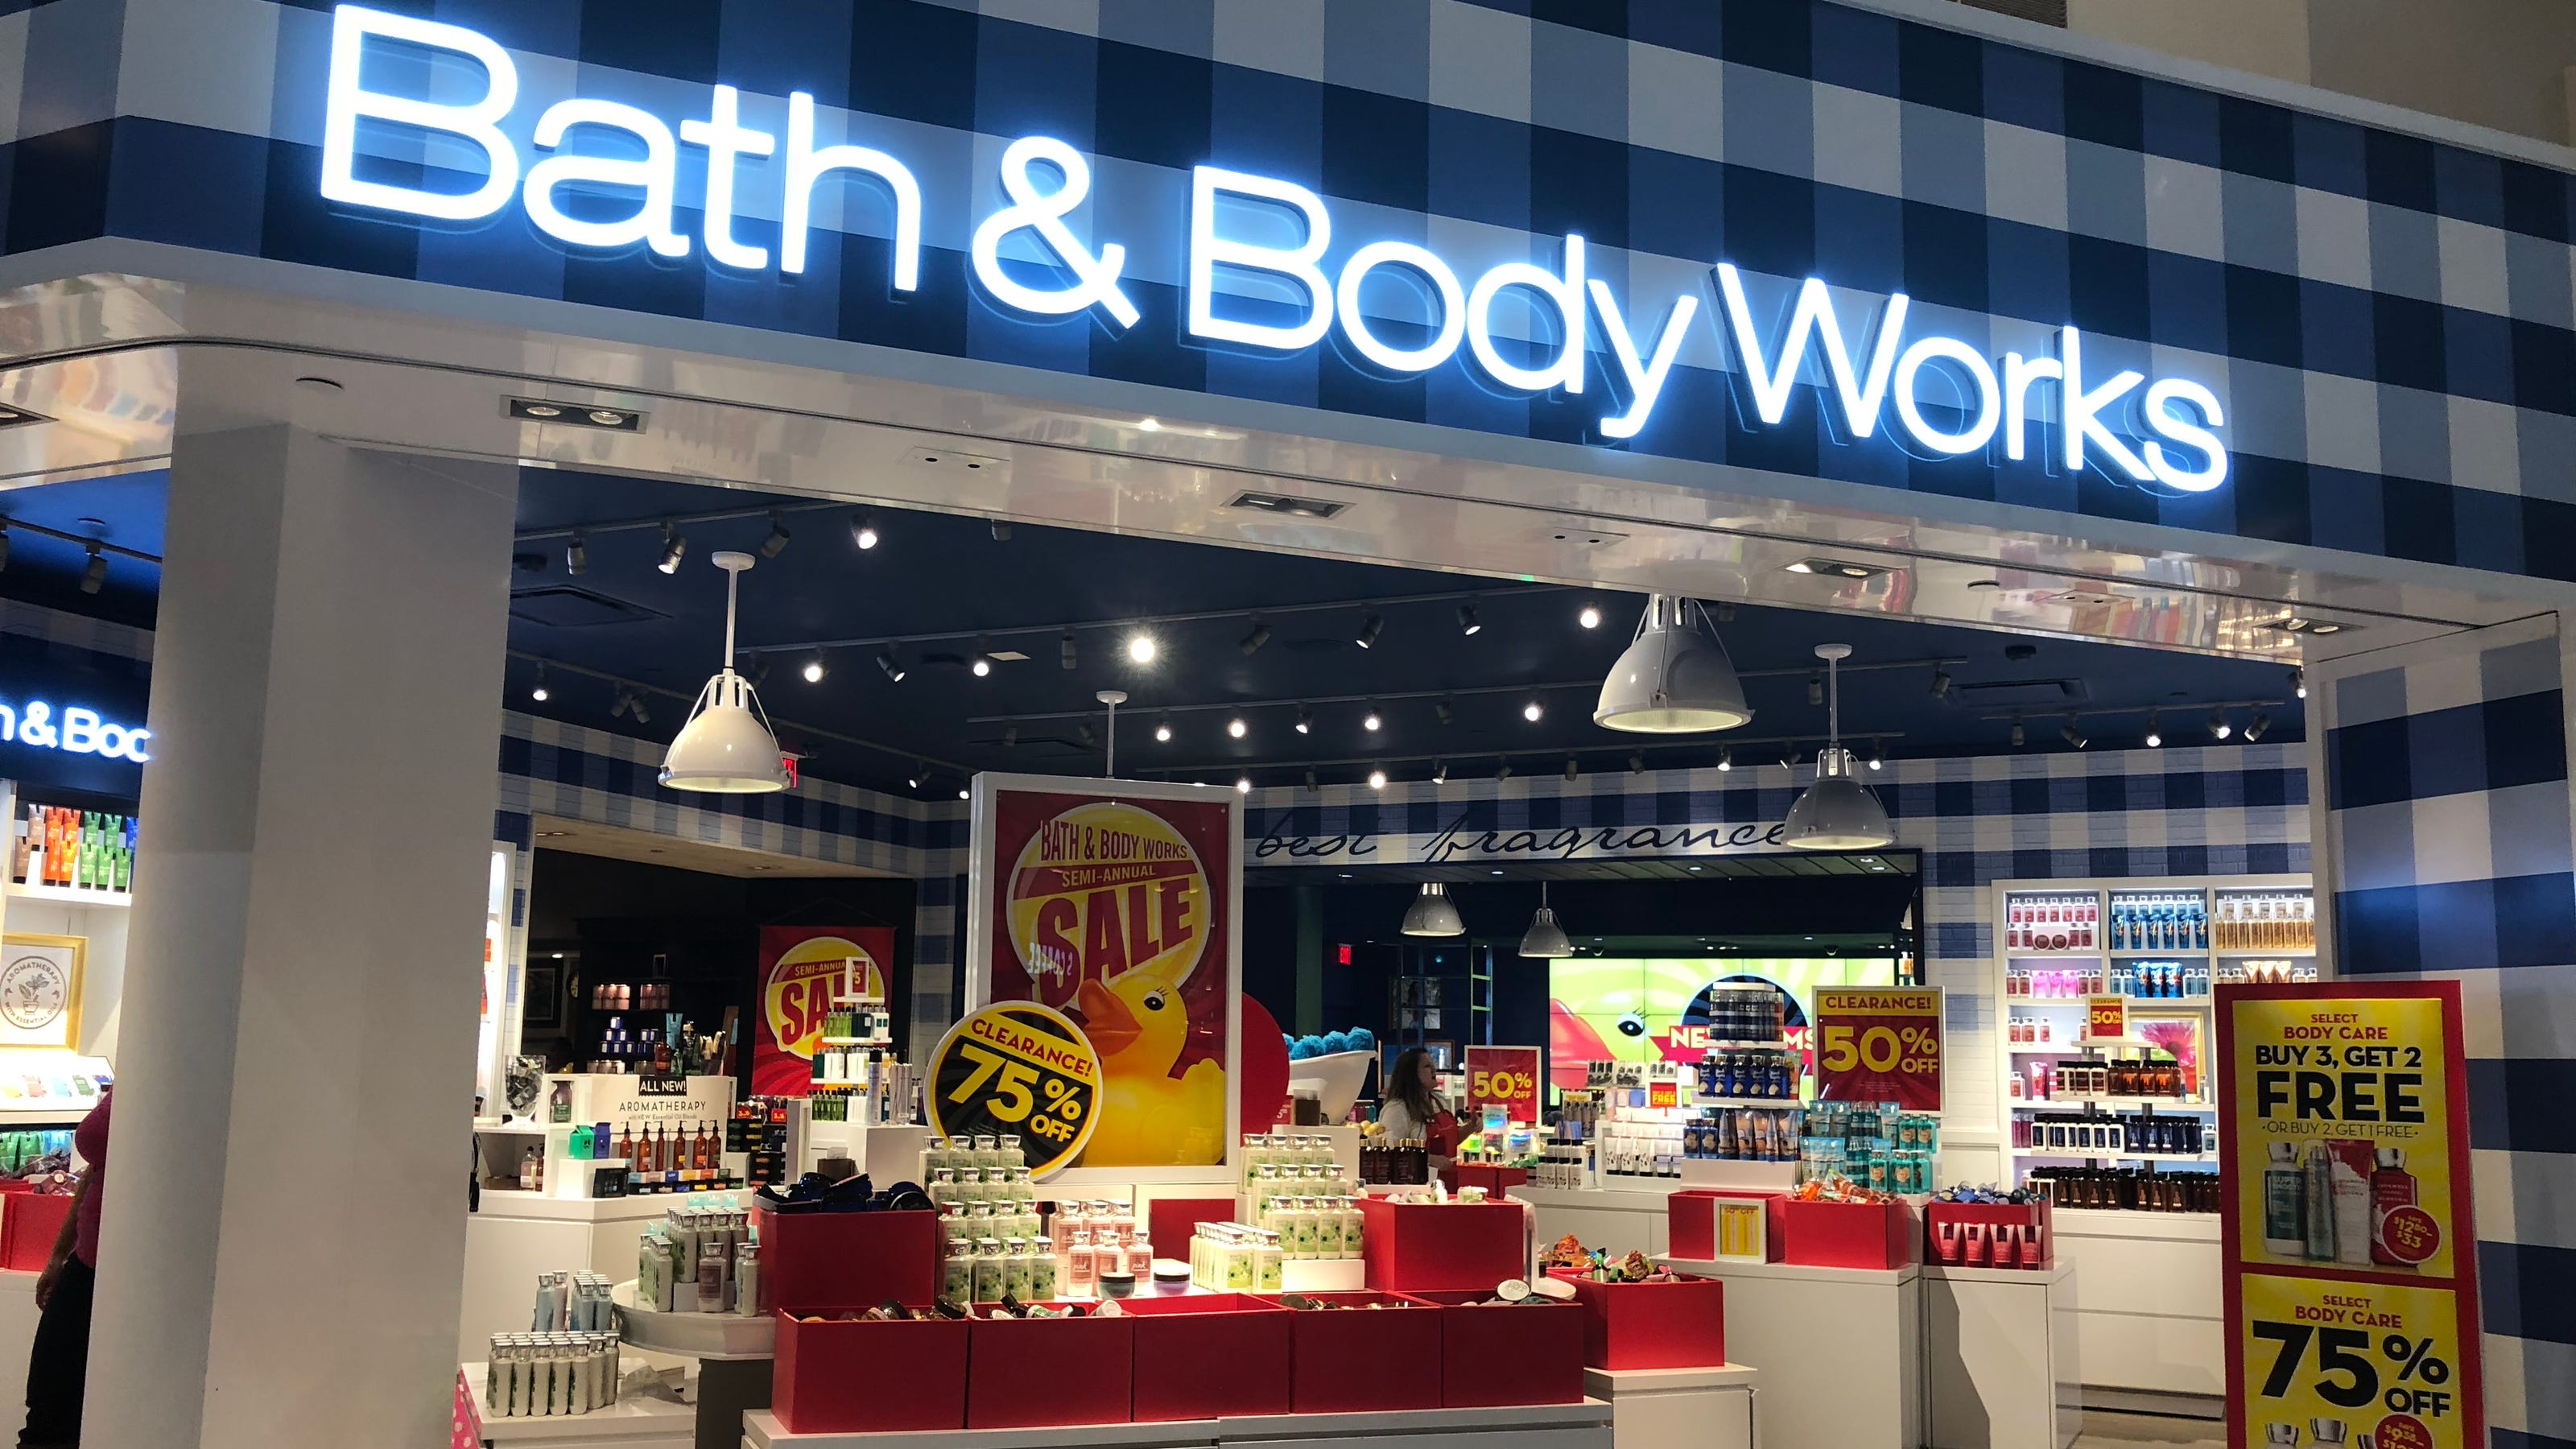 Bath and Body Works candle sale 2020 Get 9.95 candles through Sunday